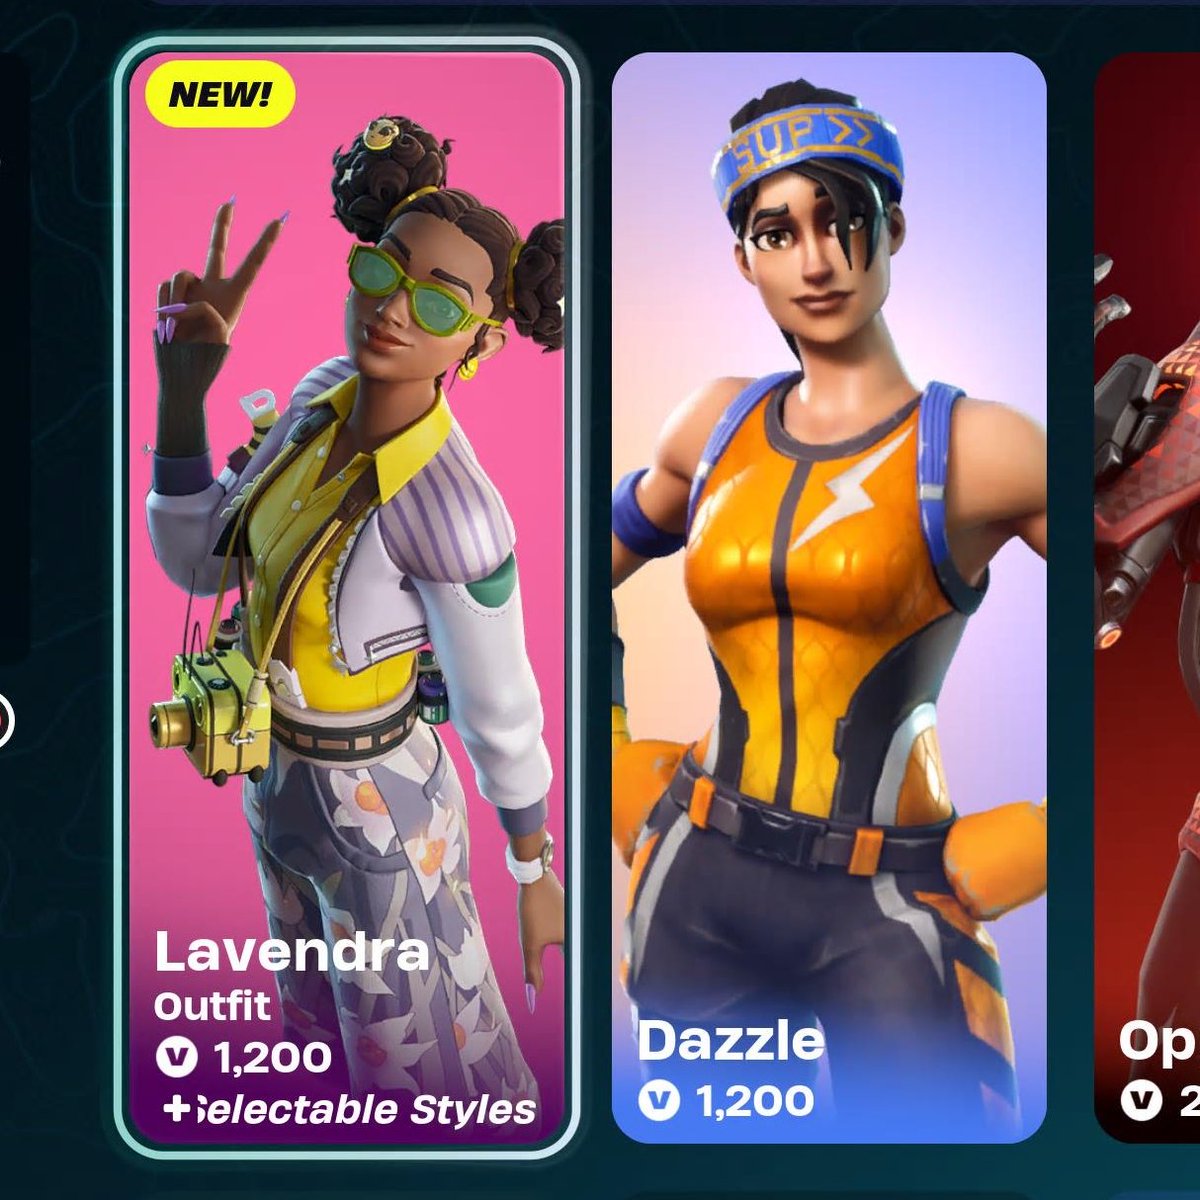 Lavendra is now available! Use Creator Code 'GuilleGAG' to support me! ❤️ #EpicPartner